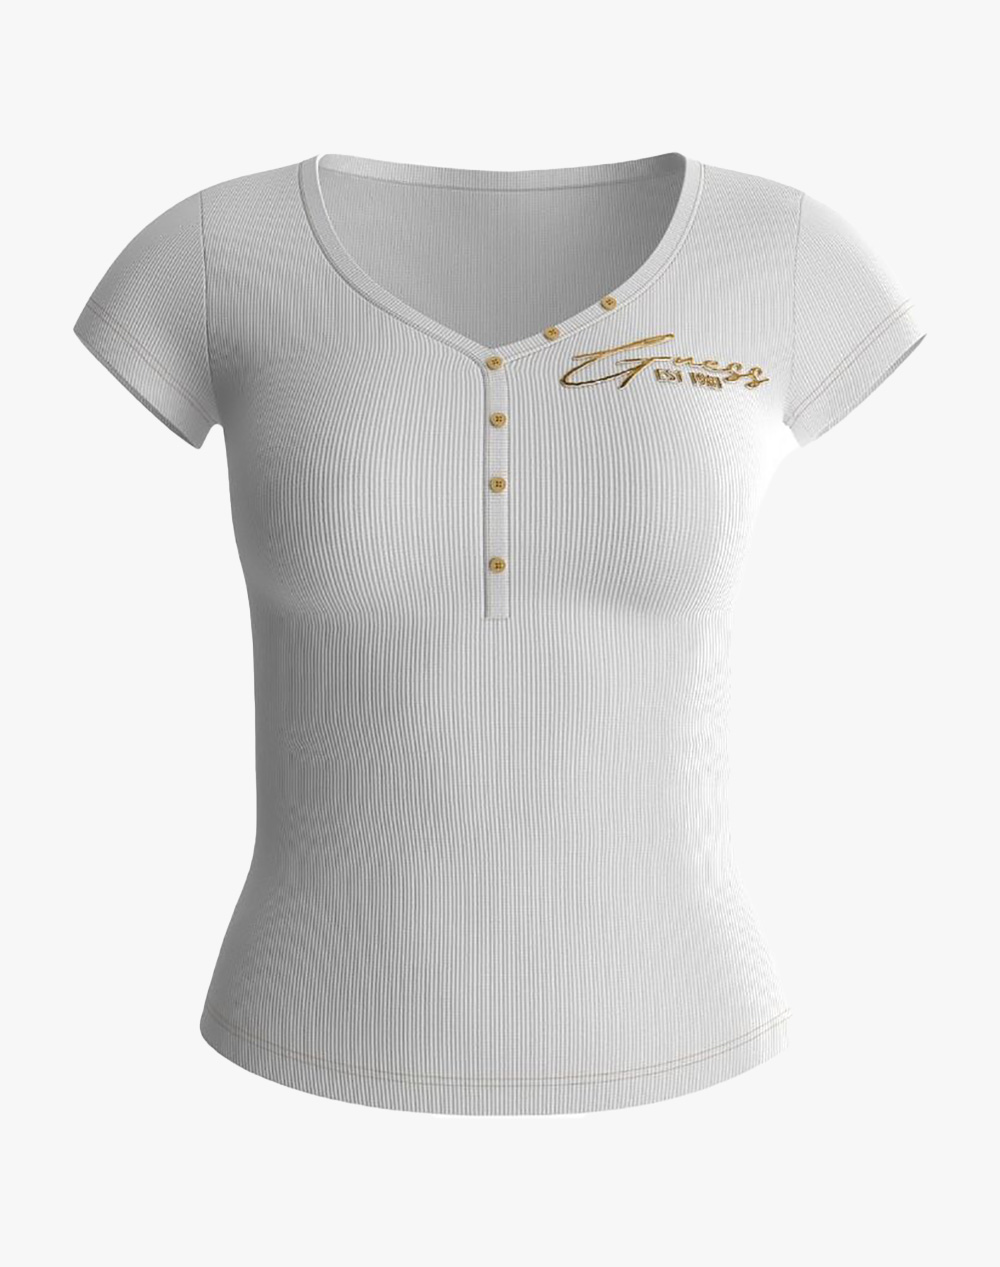 GUESS HENLEY OLYMPIA TOP ΜΠΛΟΥΖΑ ΓΥΝΑΙΚΕΙΟ W4RP47K1814-G011 White